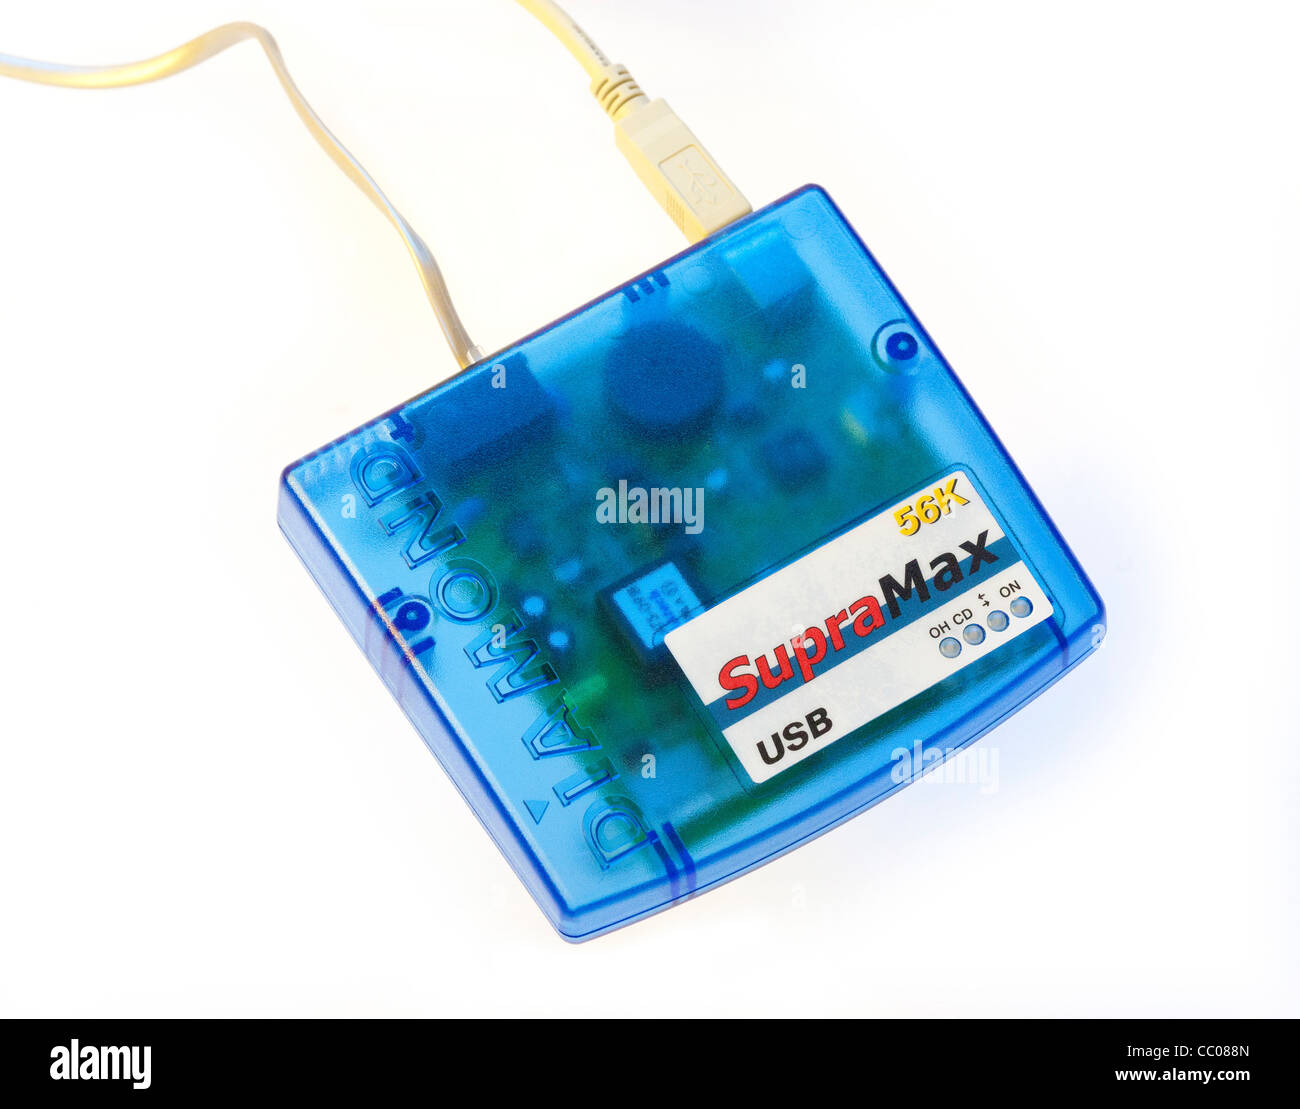 dial up internet modem for 56Kbps connection Stock Photo - Alamy